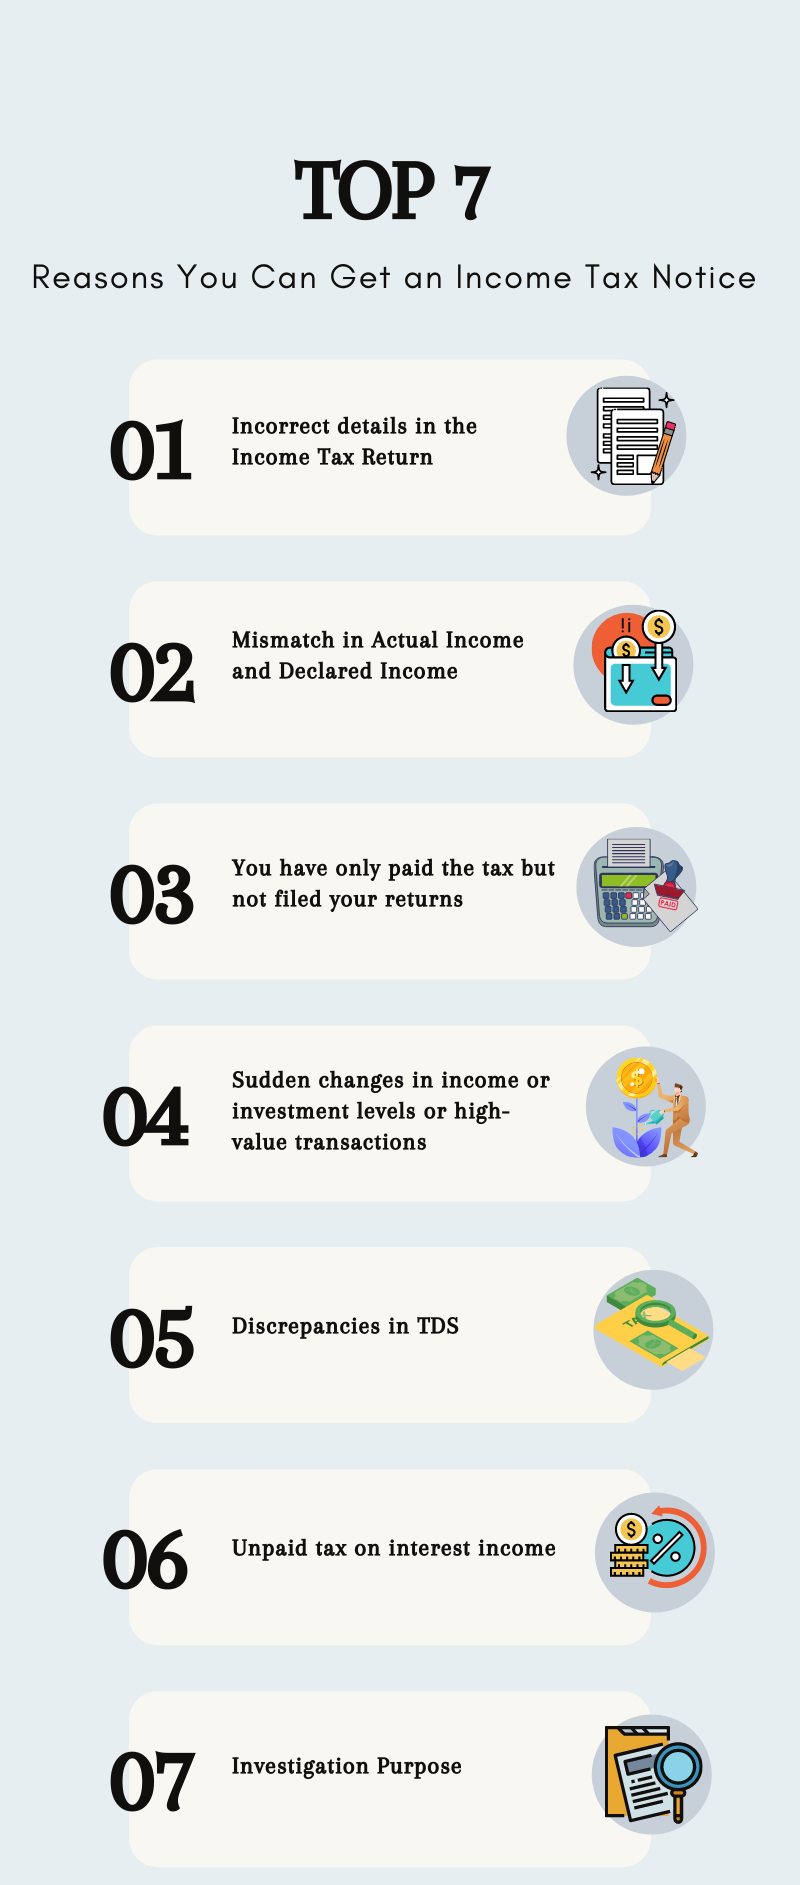 Top 7 Reasons You Can Get an Income Tax Notice